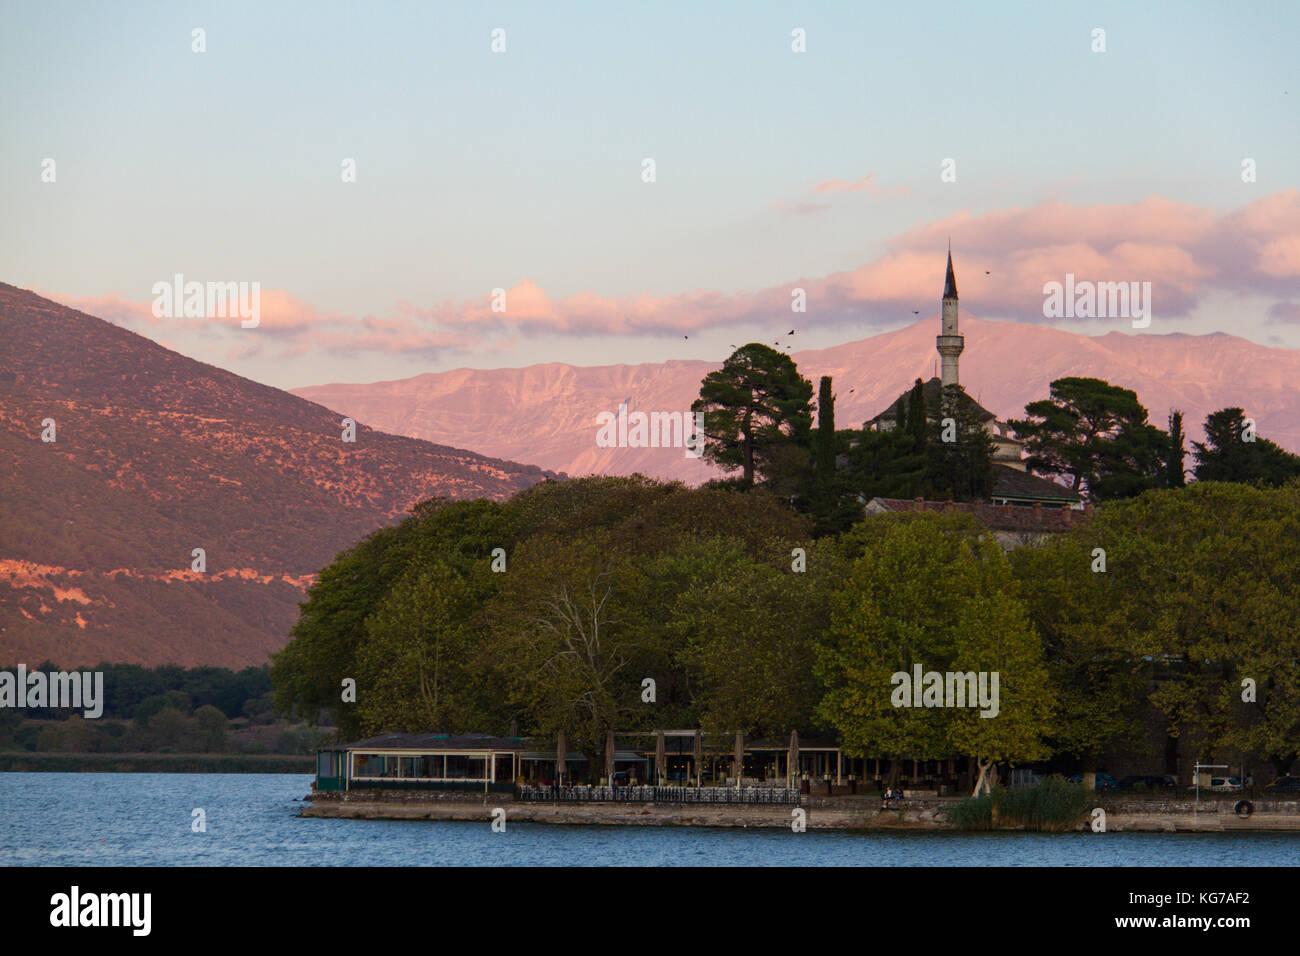 Aslan Pasha mosque built on the lake-shore in the city of Ioannina, Greece, bathed in afternoon light Stock Photo